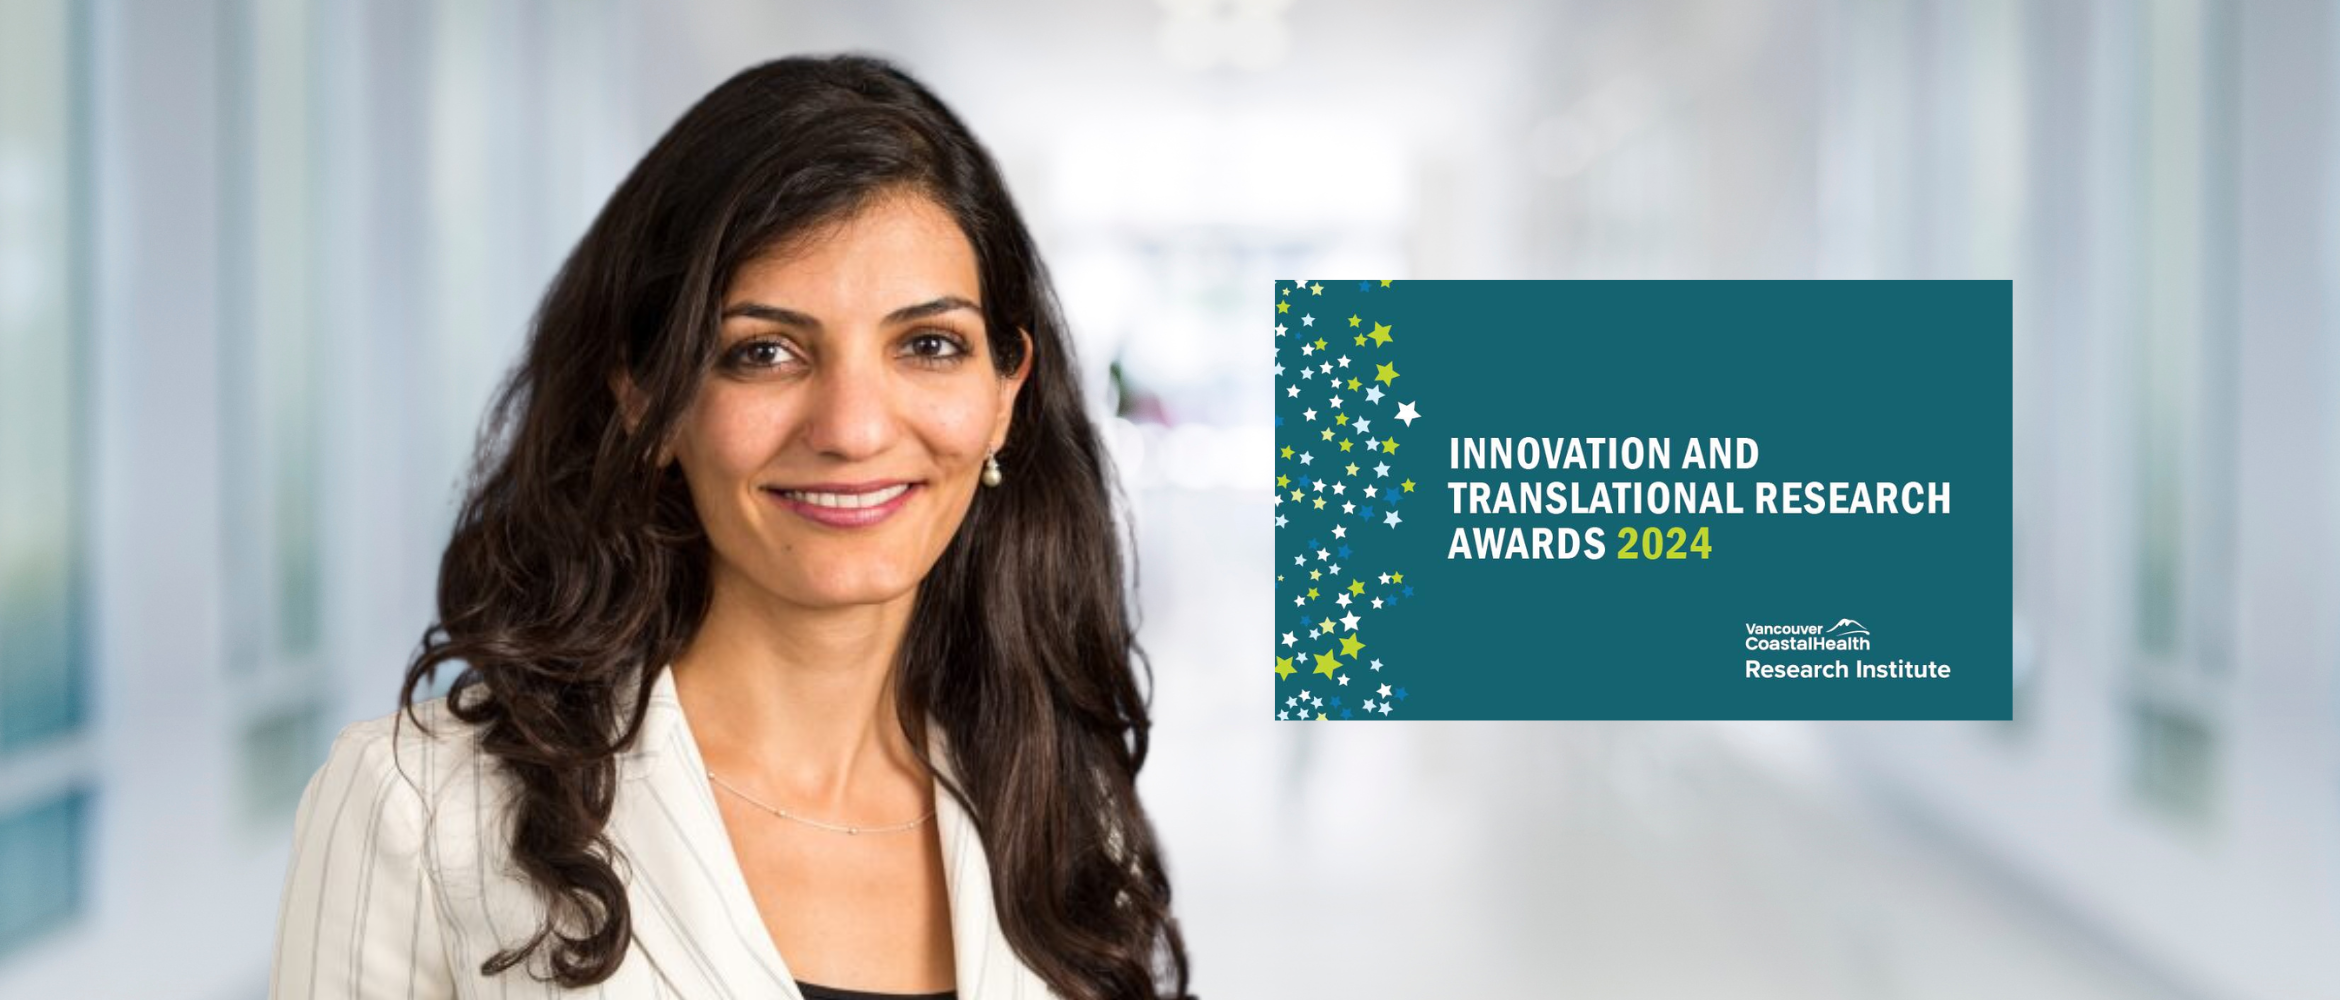 UBC Orthopaedics’ Dr. Dena Shahriari Honored with 2024 Innovation and Translational Research Award